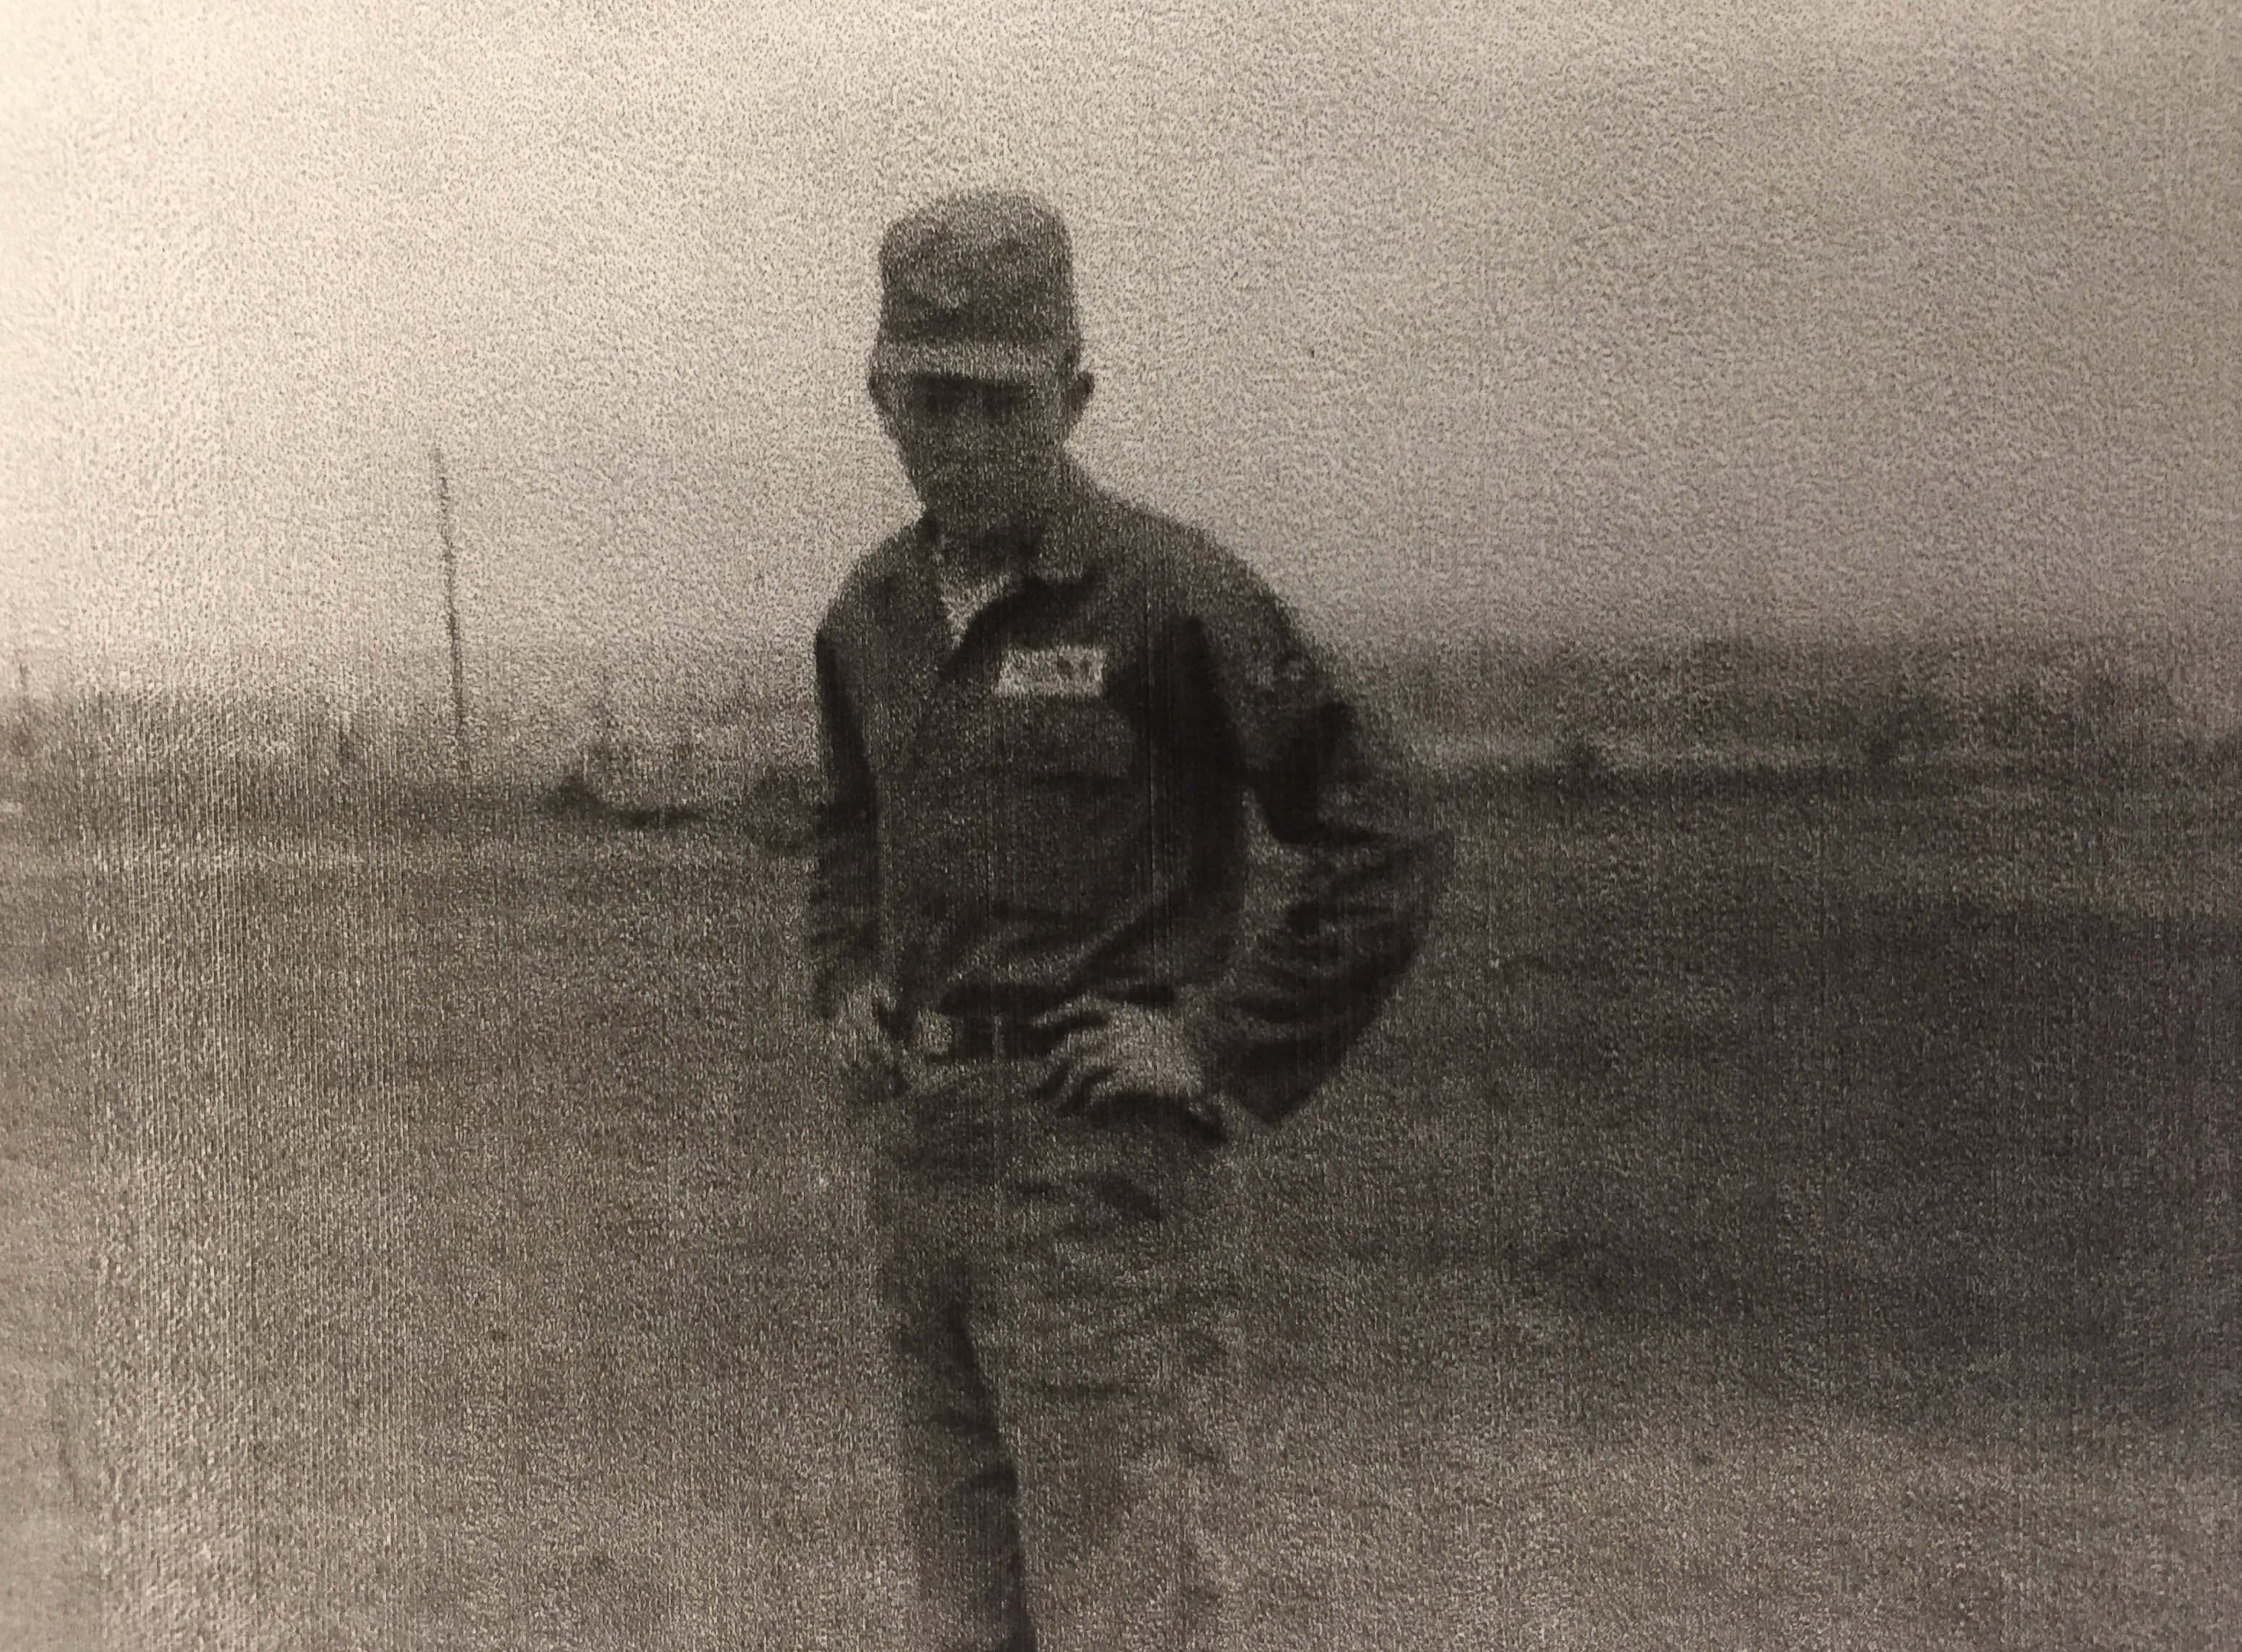 A young man in uniform with hands on his hips.